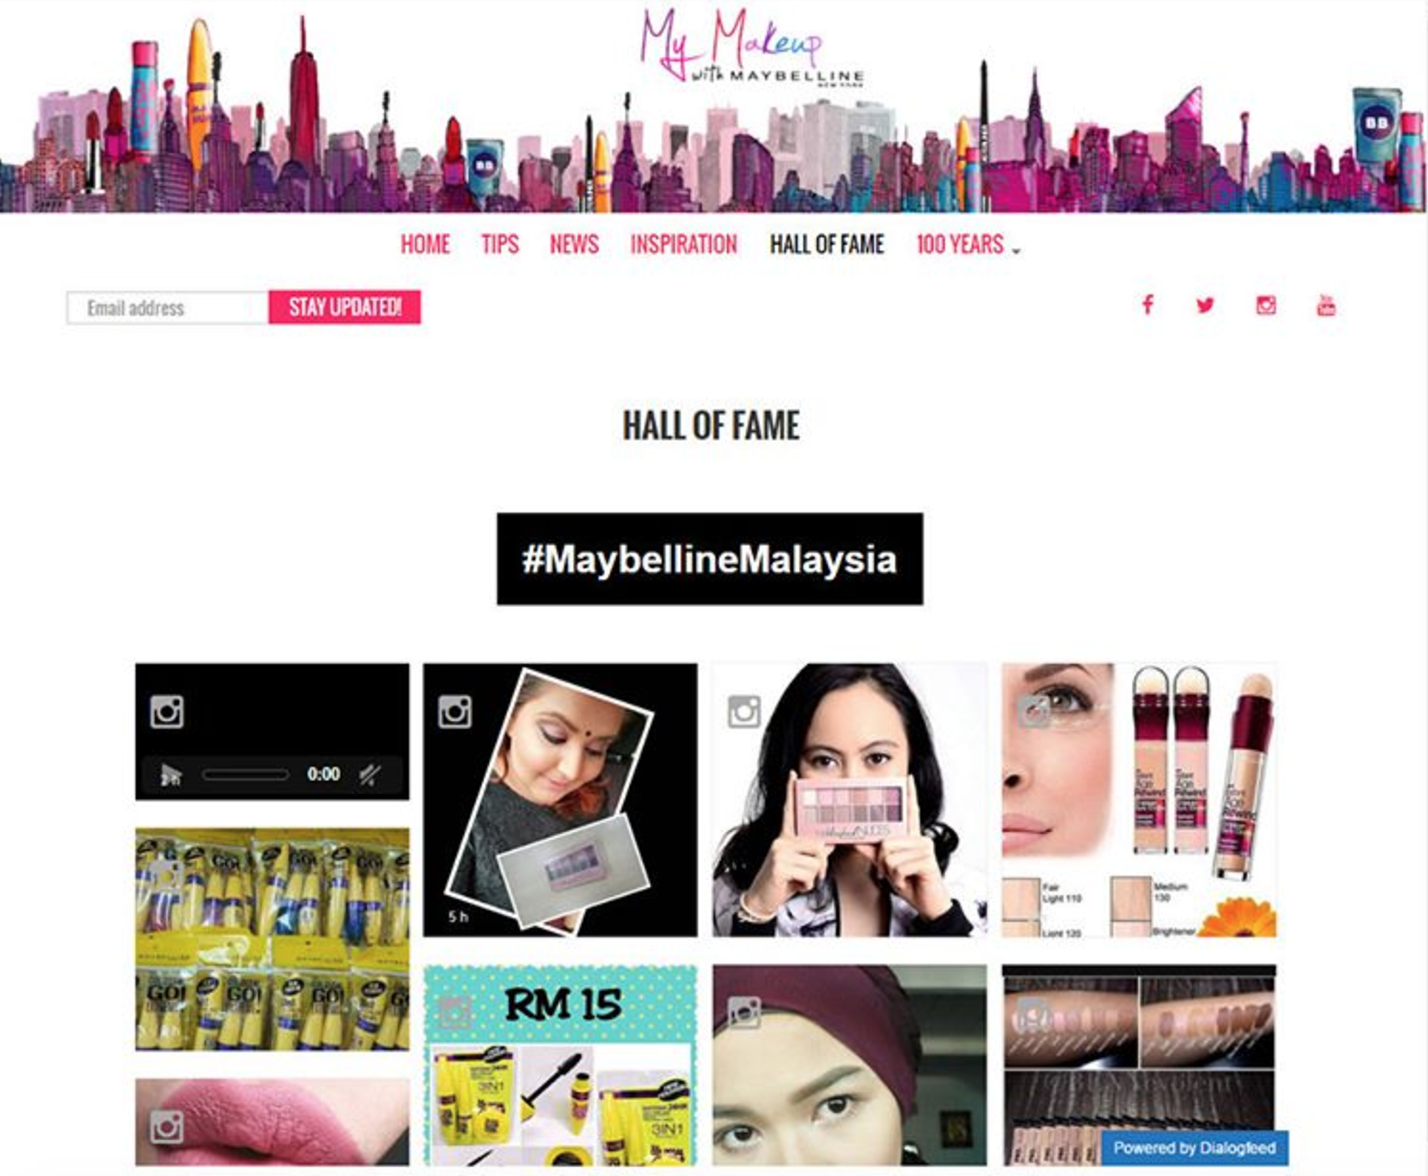 Dialogfeed has made a hashtag campaign for the social wall of Maybelline